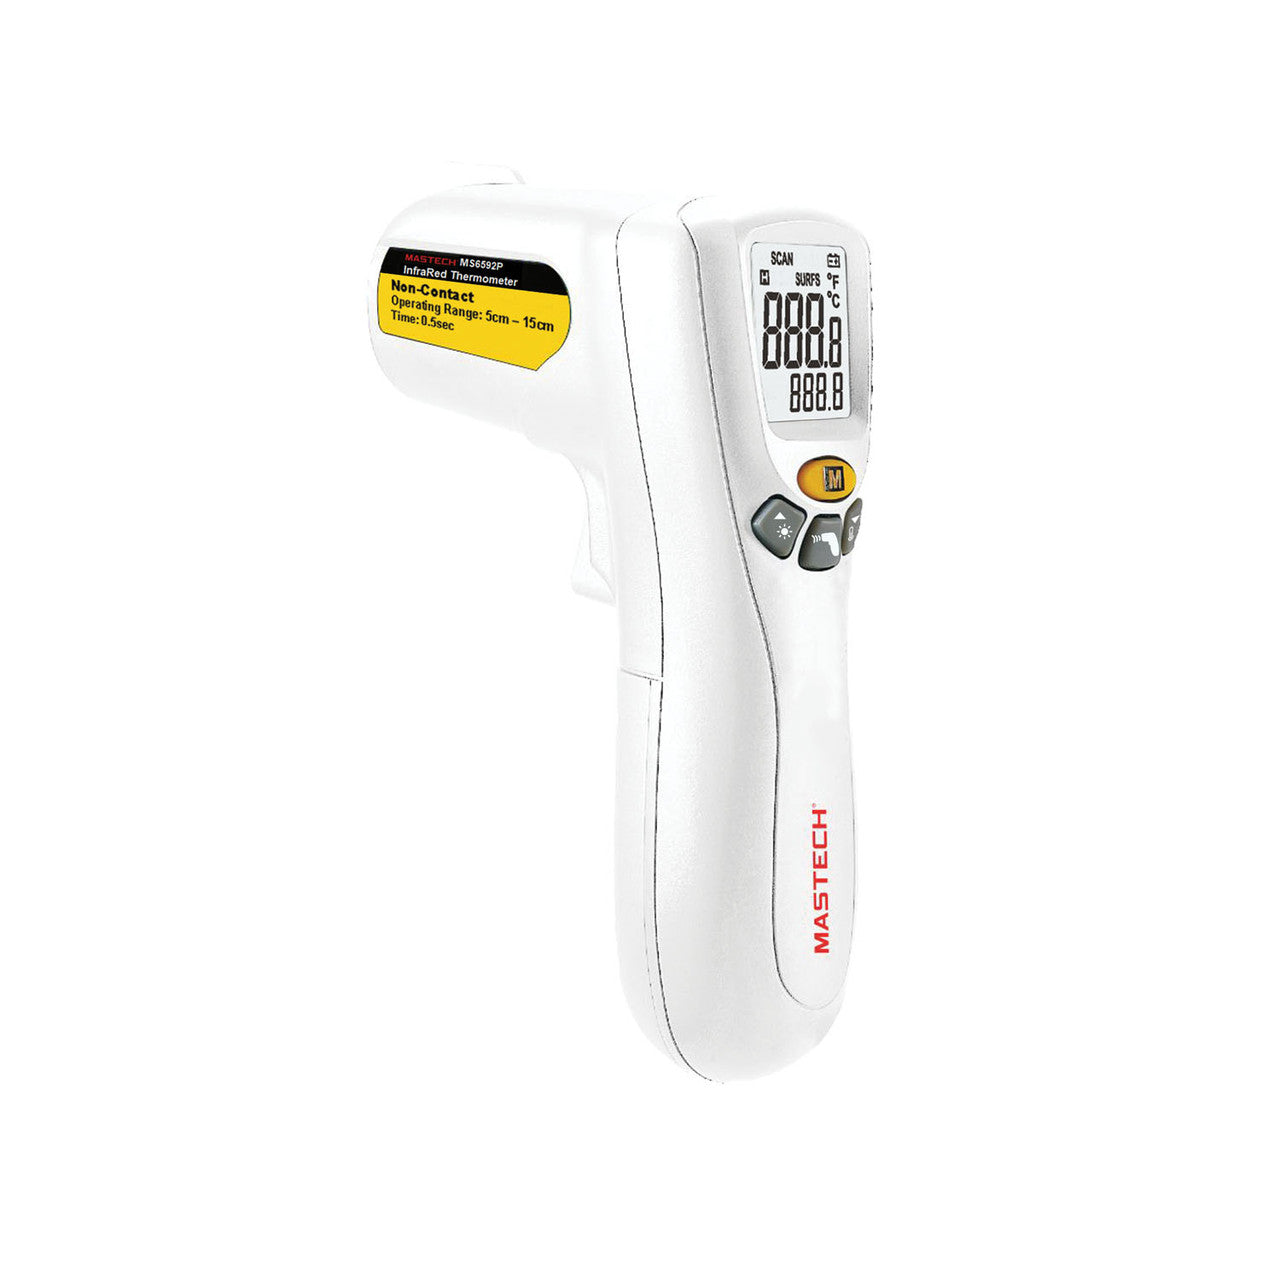 Power Probe MS6592P Non-Contact Infrared Thermometer 89 to 108 degrees F - MPR Tools & Equipment